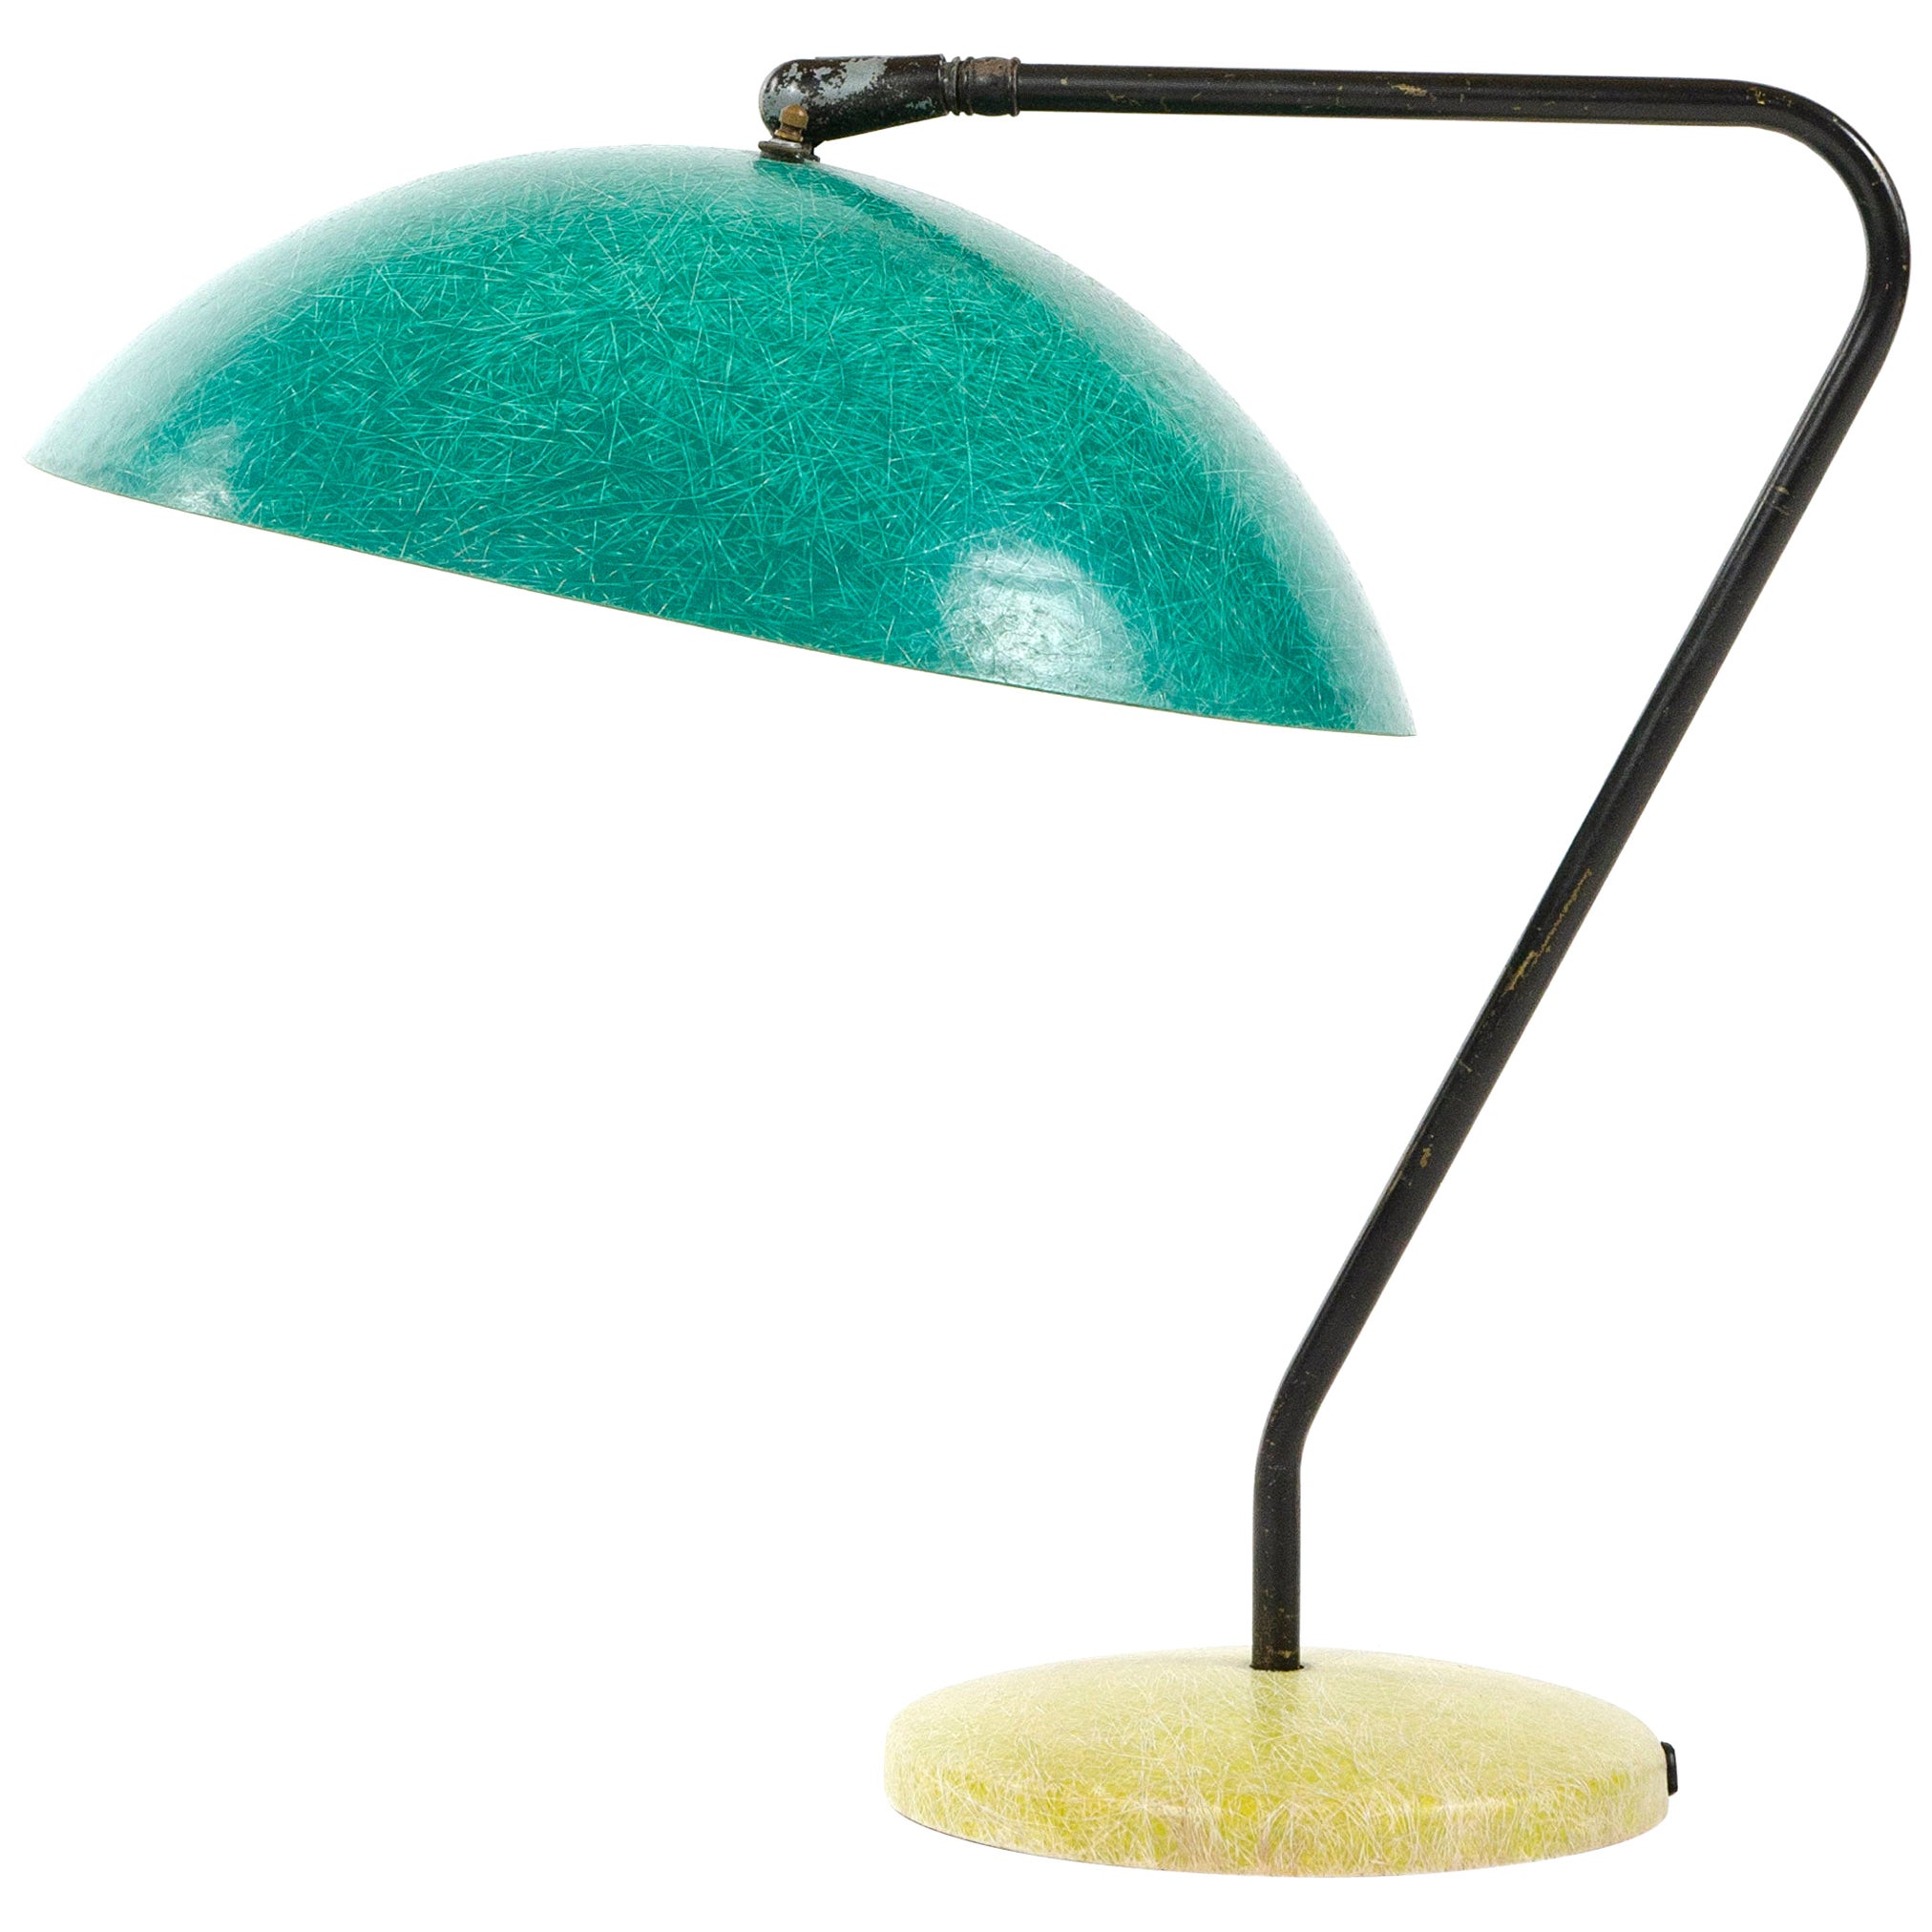 1950s Petite Wedge-Form Desk Lamp For Sale at 1stDibs